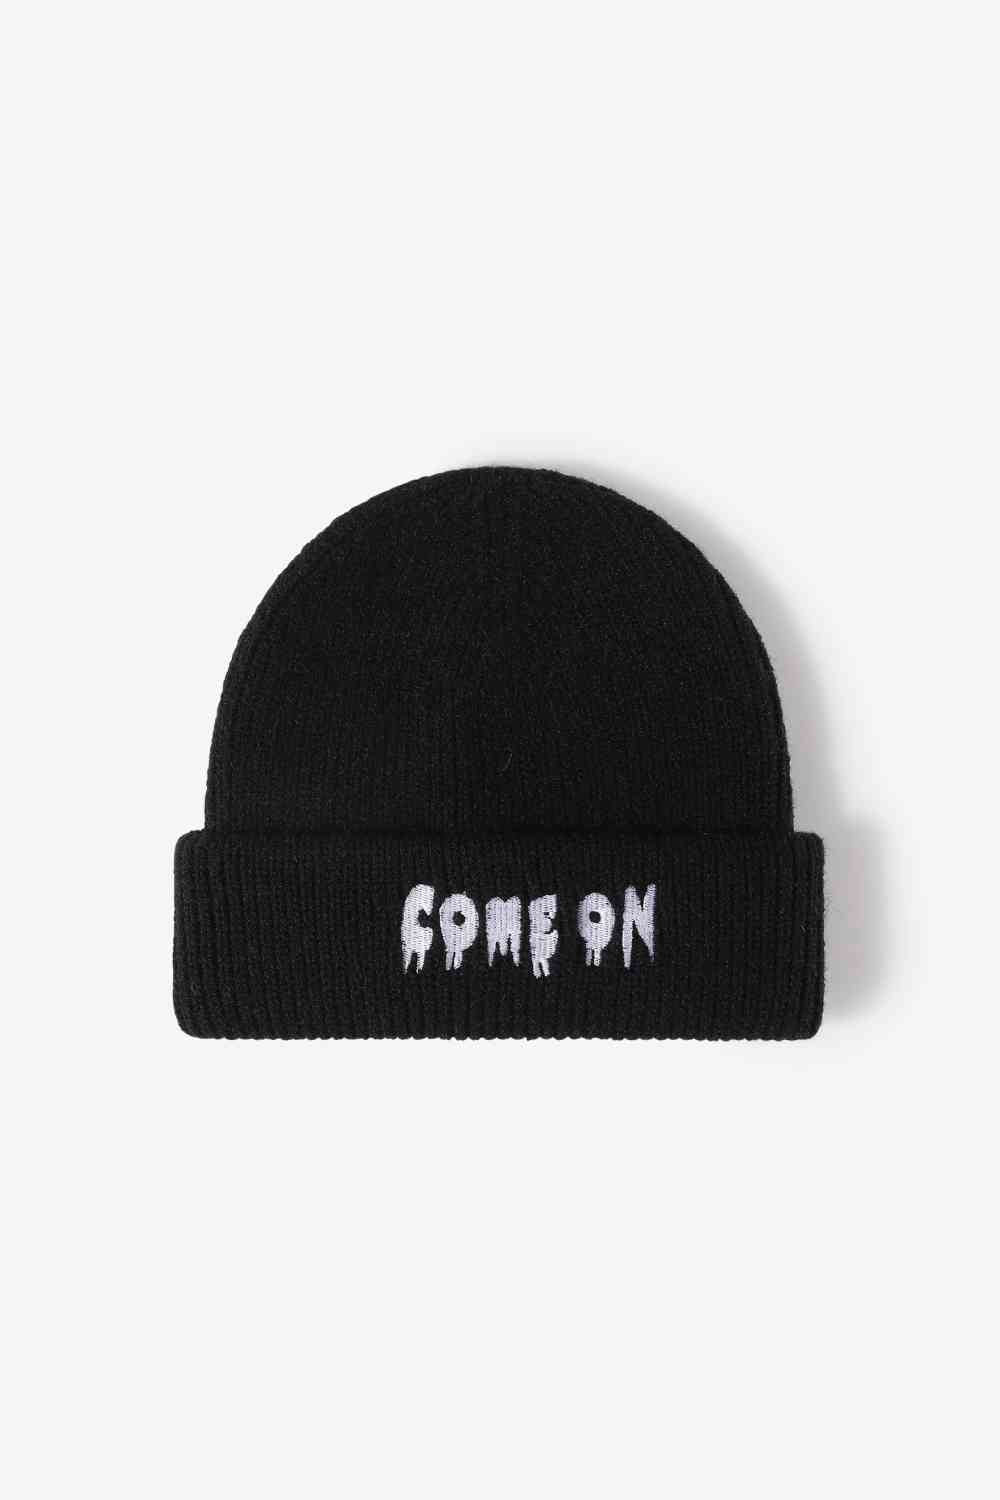 COME ON Embroidered Cuff Knit Beanie Black One Size